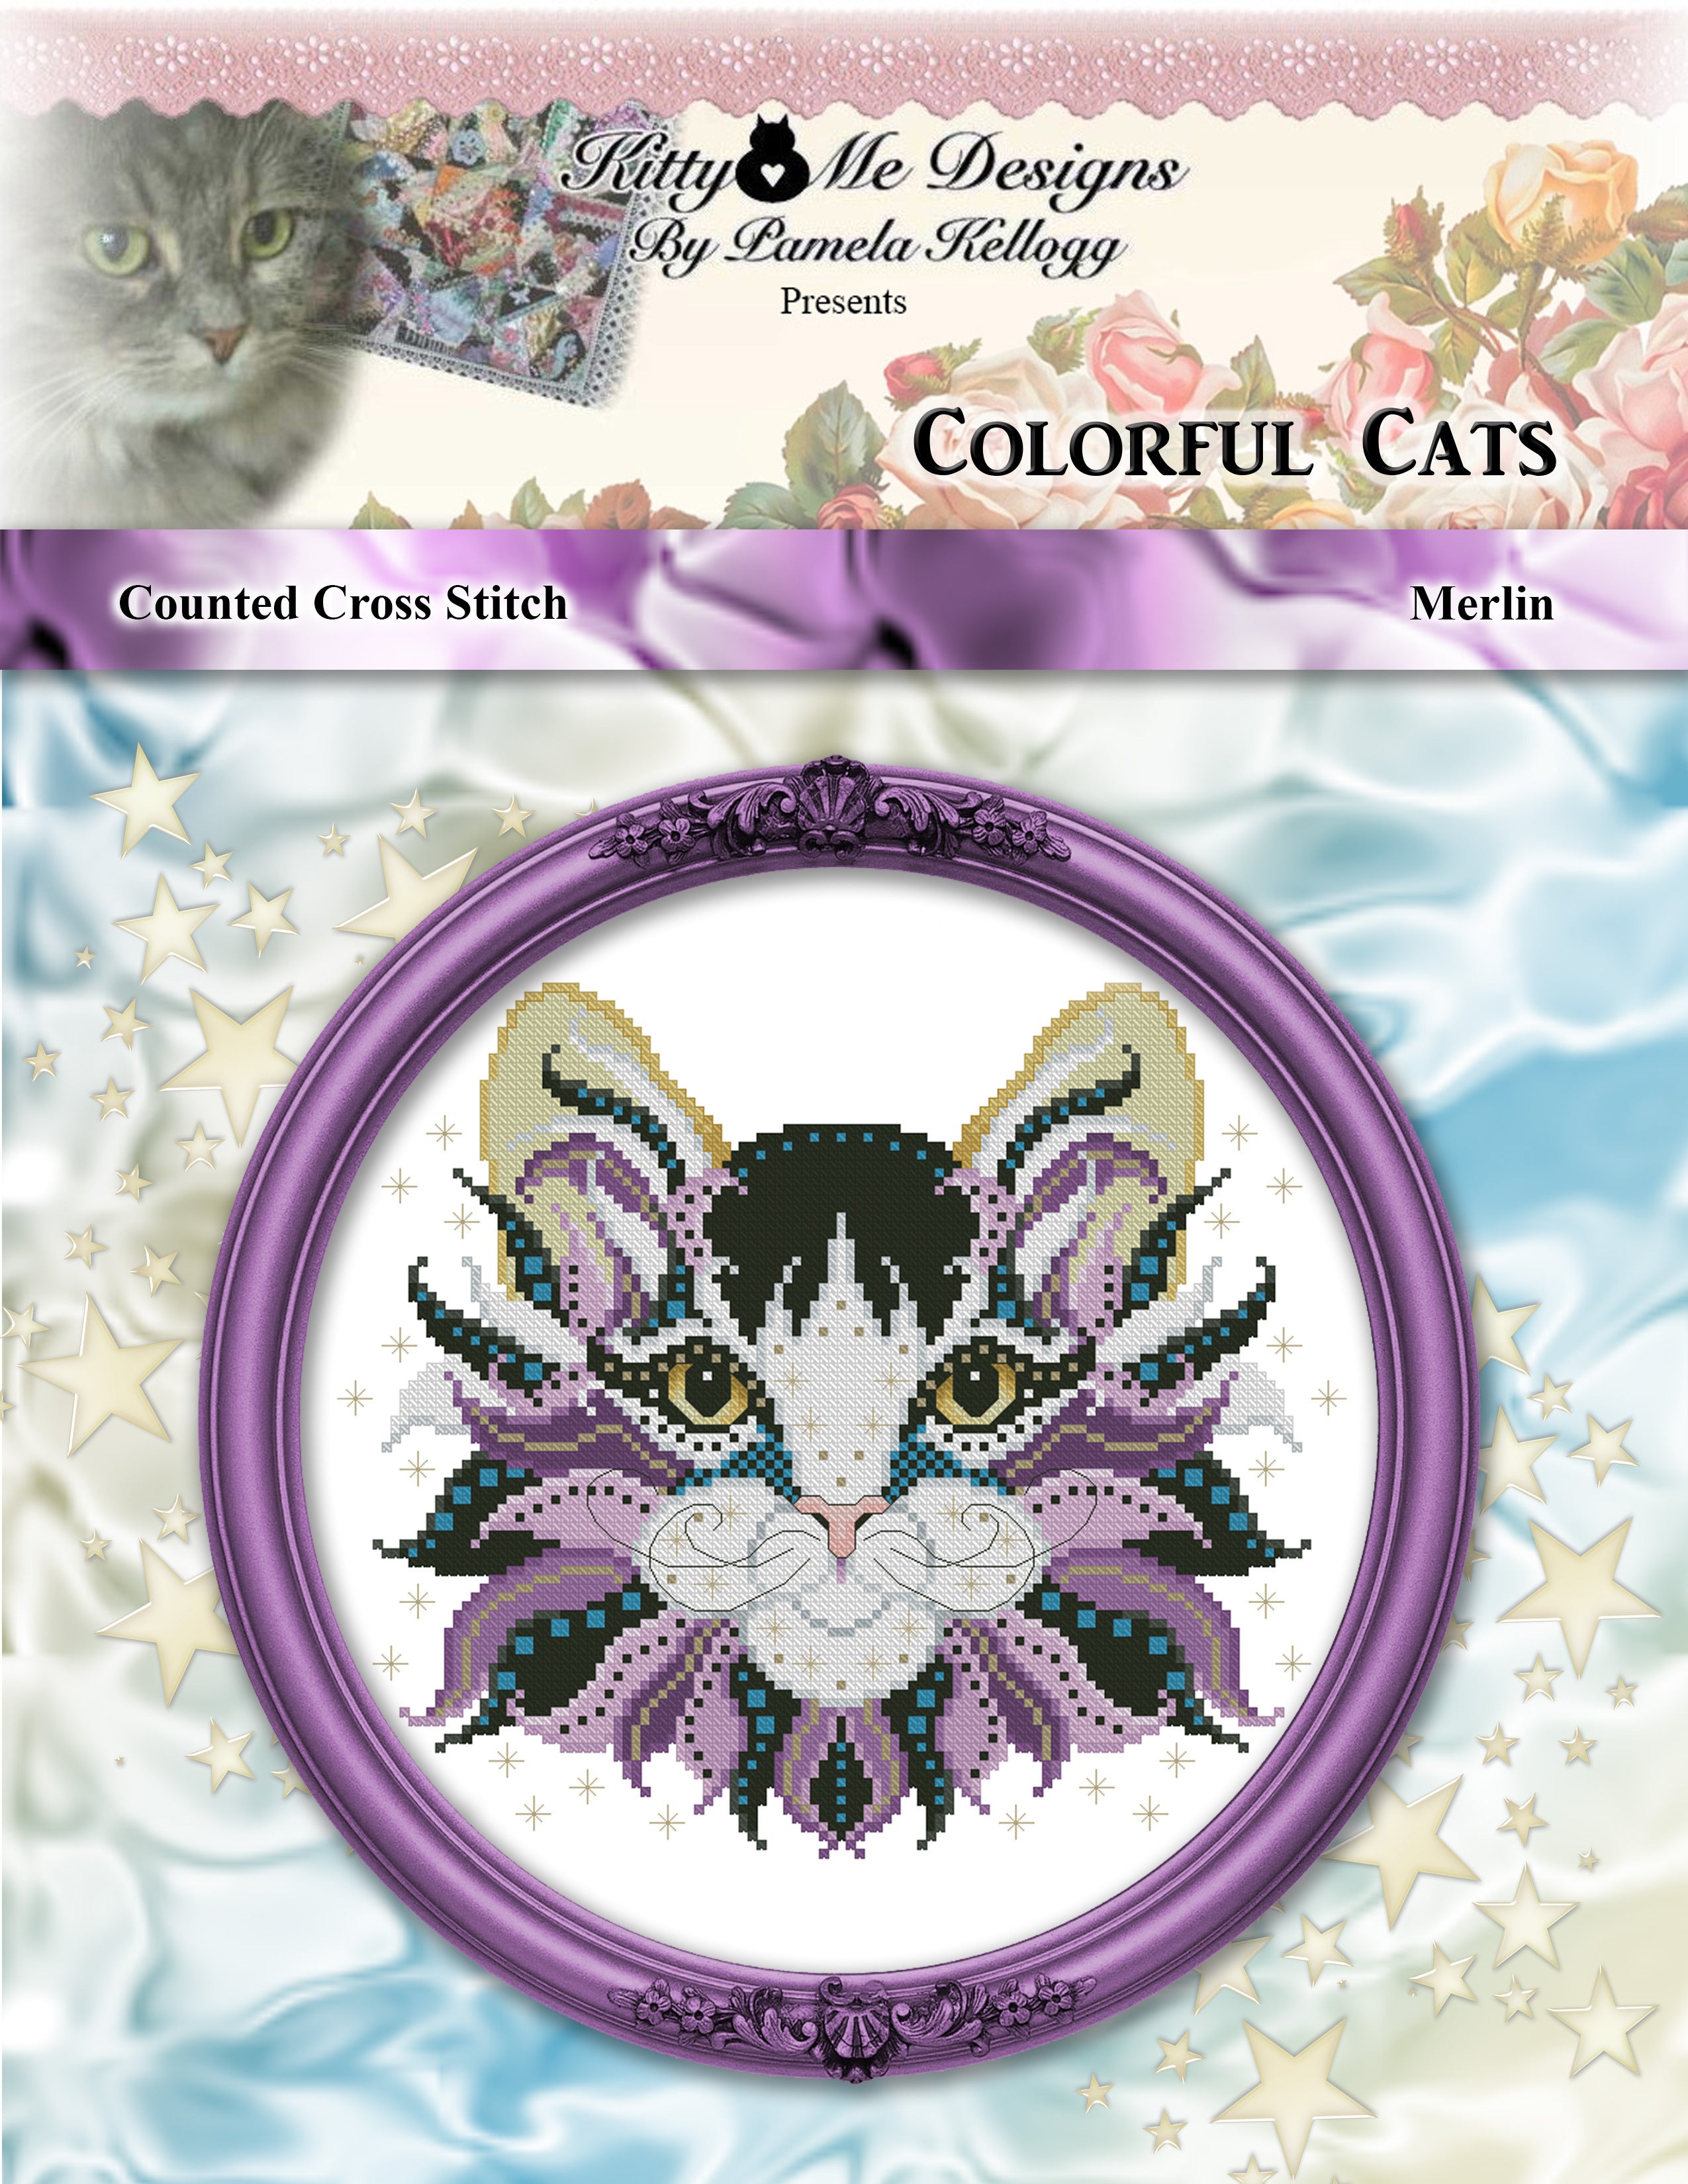 Colorful Cats: Merlin by Kitty and Me Designs